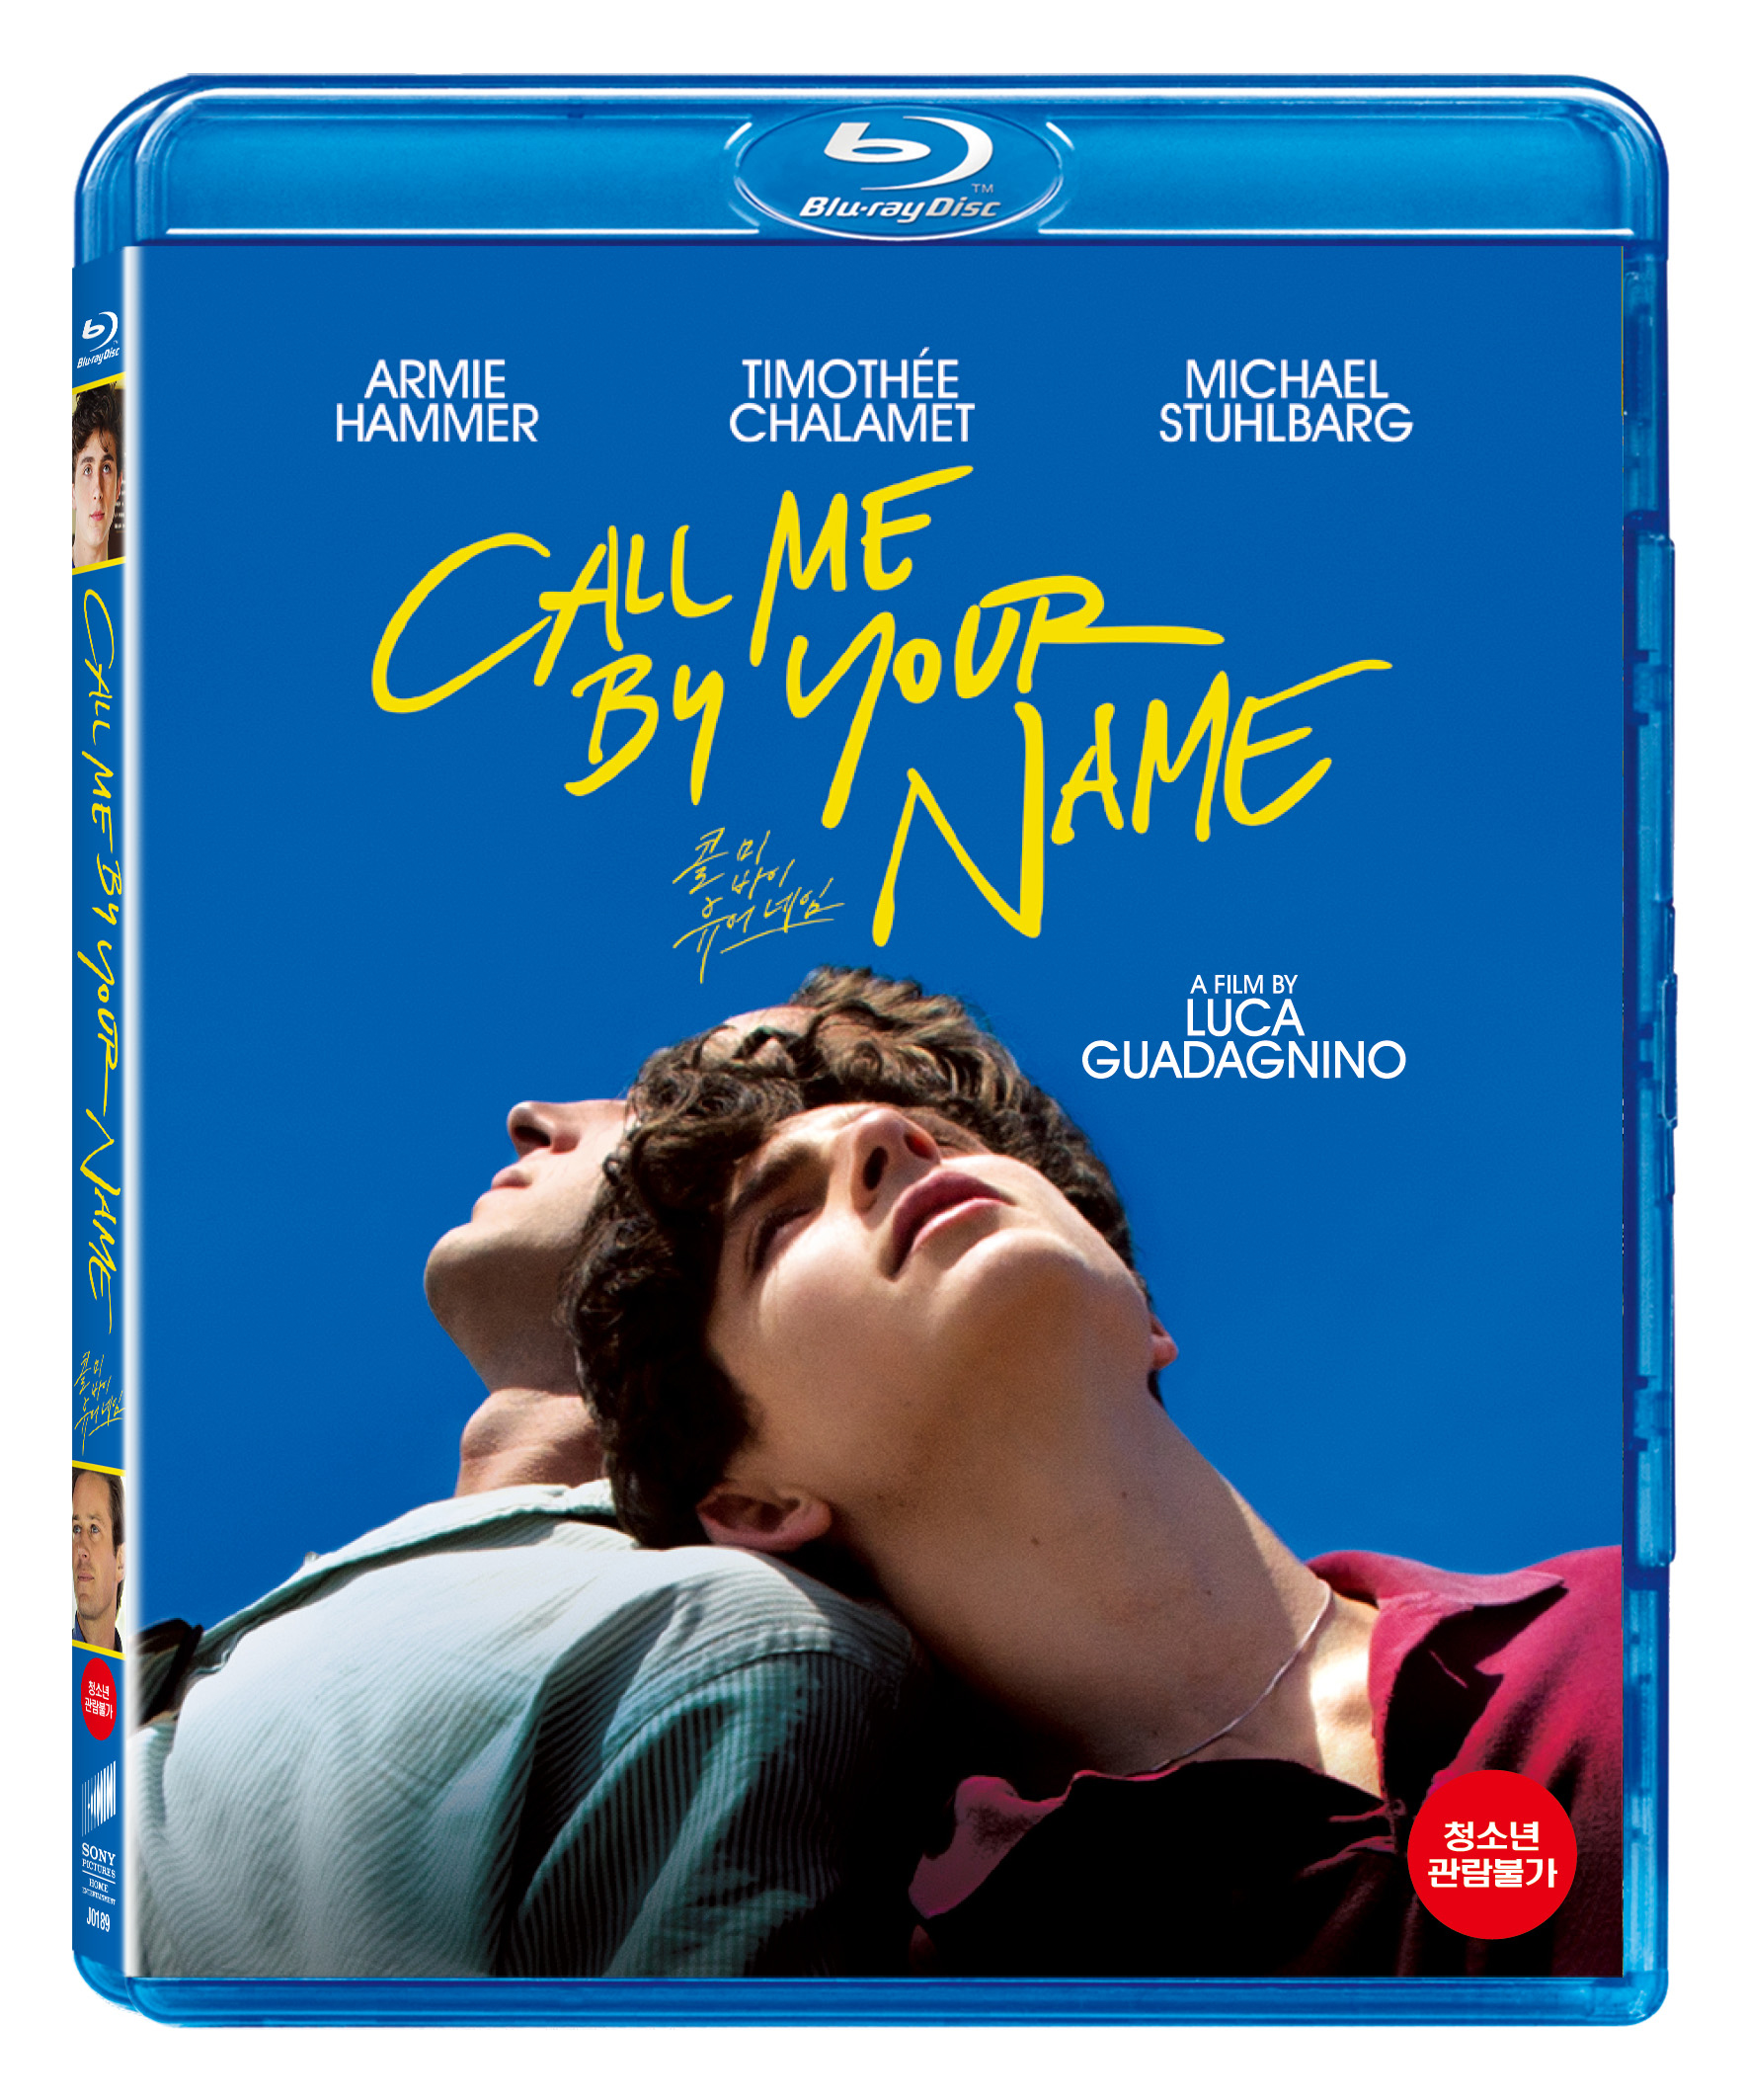 [Blu-ray] Call Me By Your Name Plain Edition